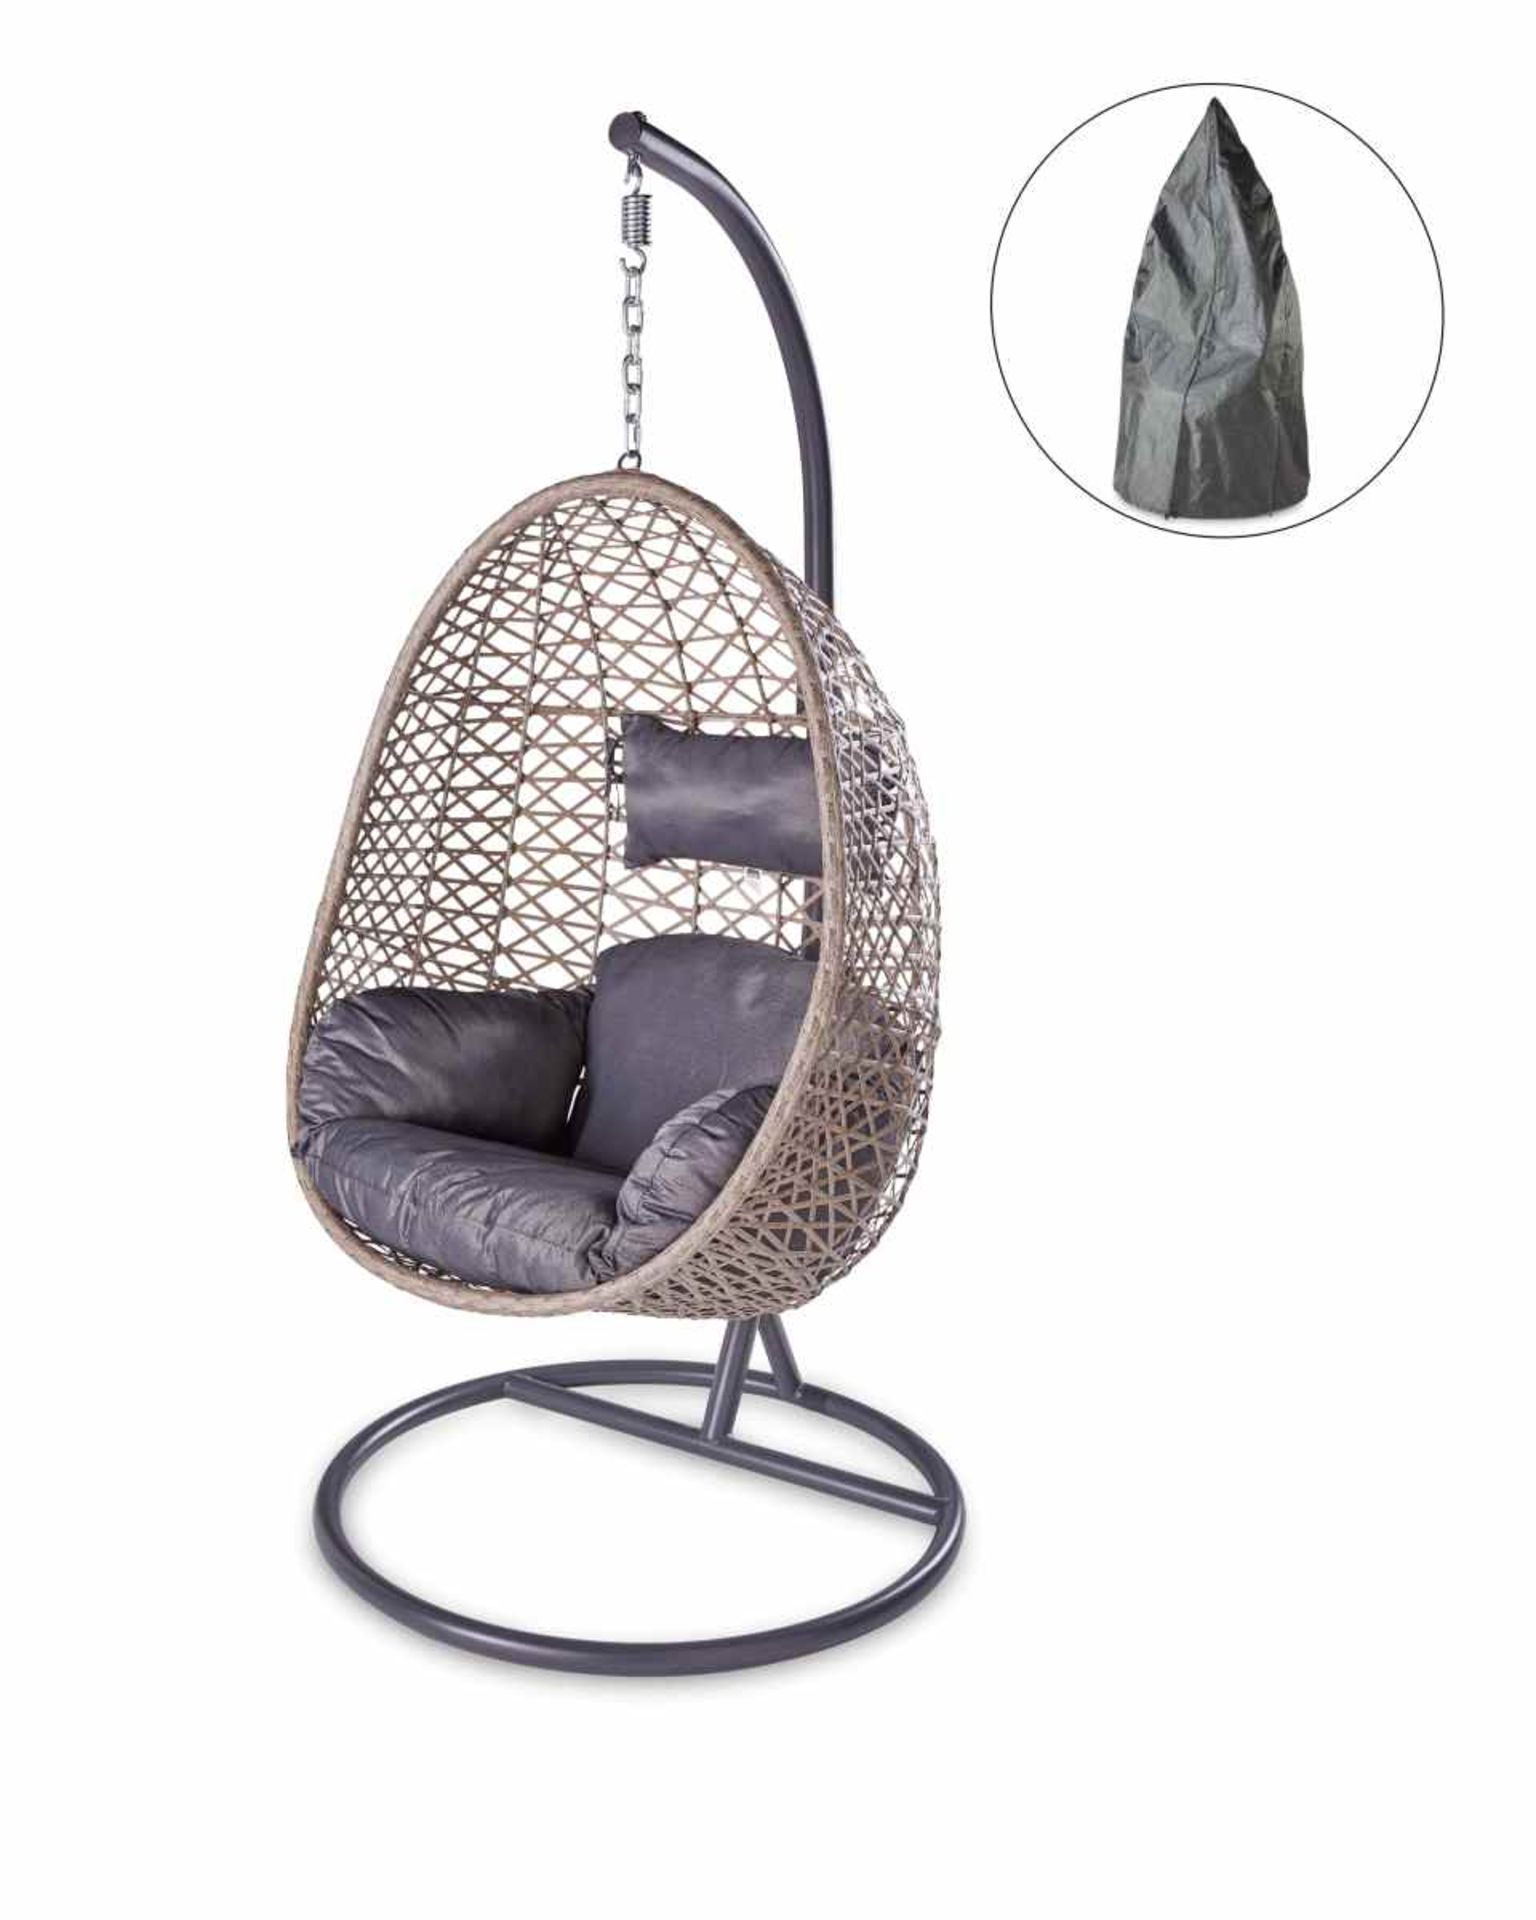 Luxury Hanging Egg Chair. The Hanging Egg Chair is the ideal way to relax in stylish comfort.